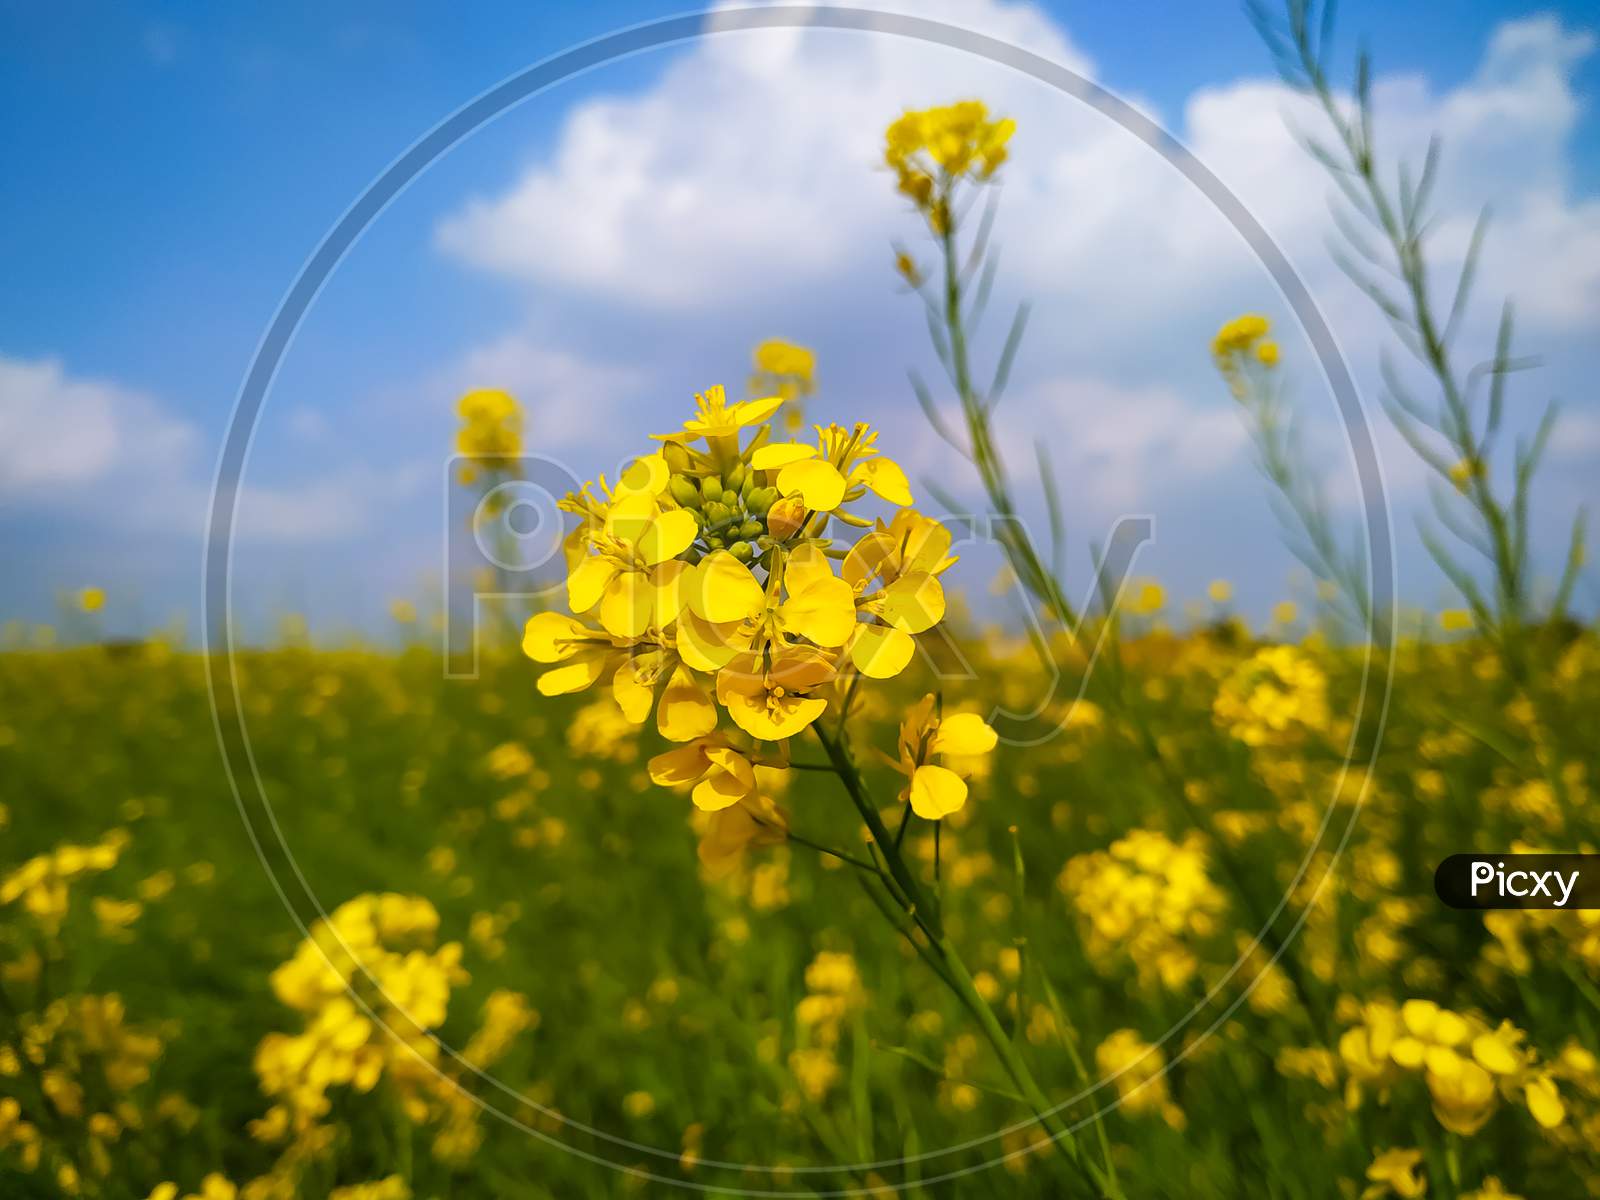 Rape Mustard Flowers Close-Up Against A Blue Sky With Clouds In Rays Of Sunlight